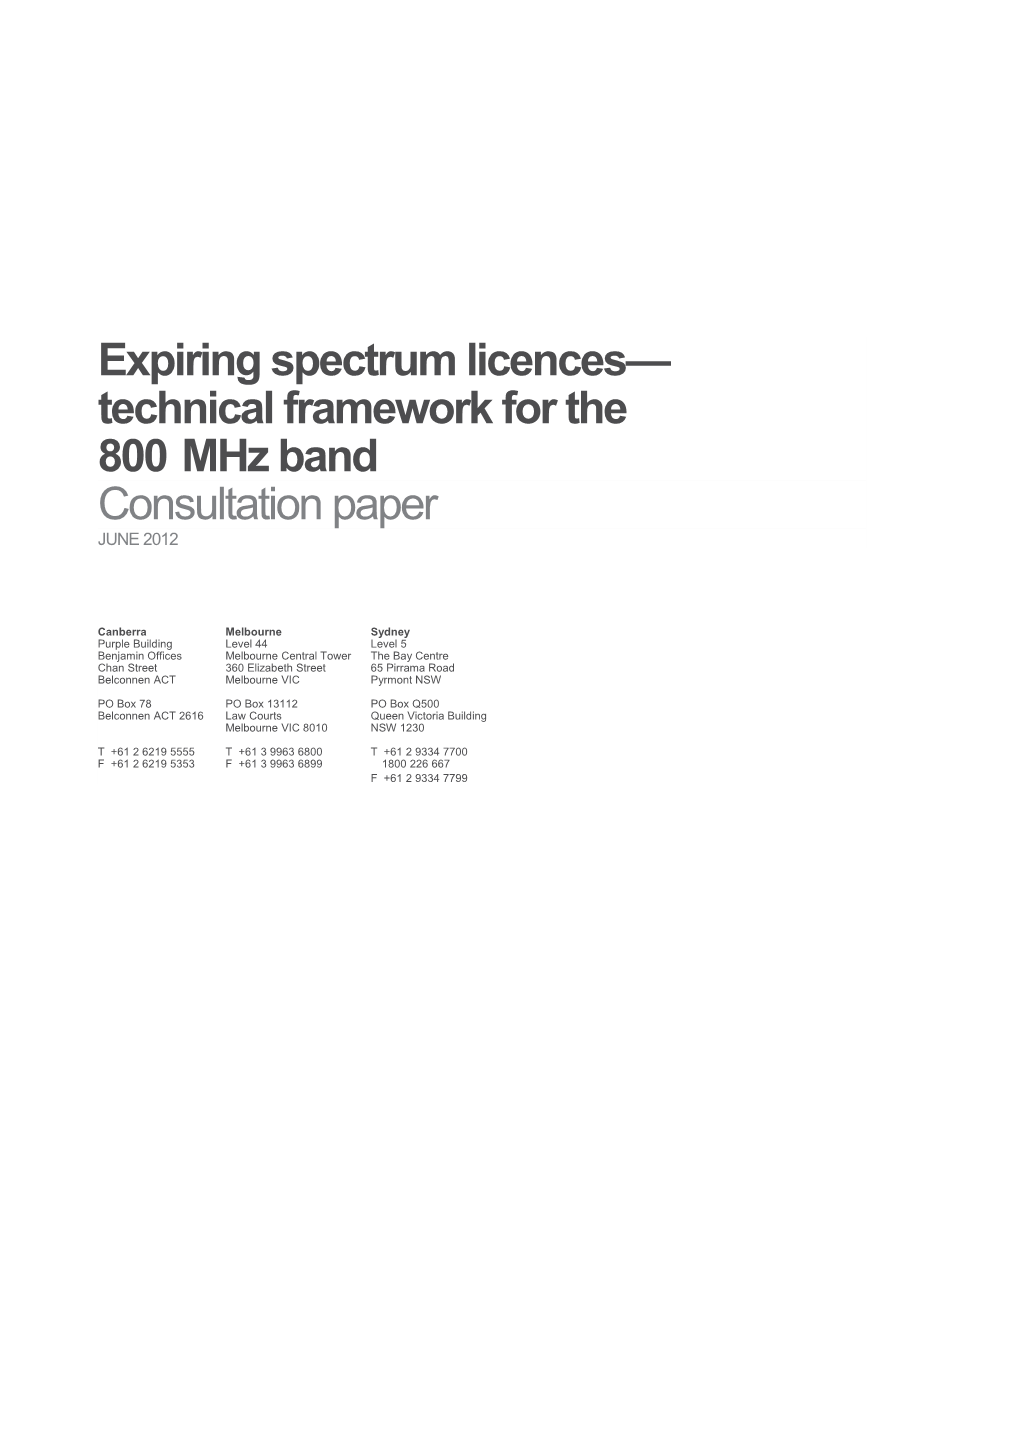 IFC 20/2012 - Expiring Spectrum Licences Technical Framework for the 800 Mhz Band